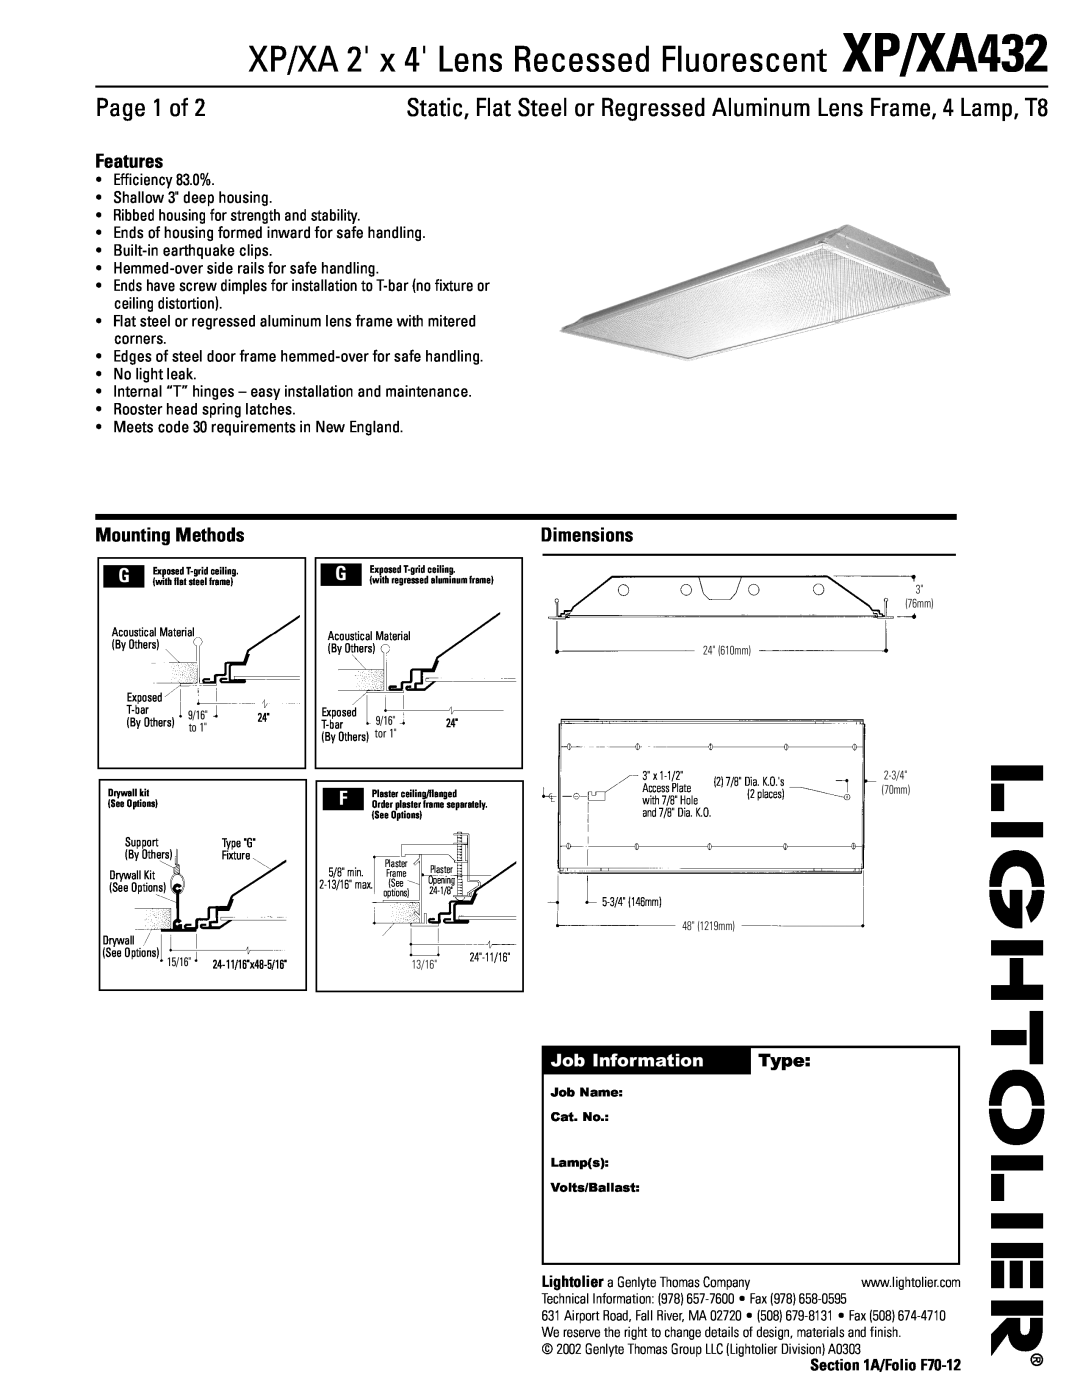 Lightolier dimensions XP/XA 2 x 4 Lens Recessed Fluorescent XP/XA432, Page 1 of, Features, Mounting Methods, Dimensions 